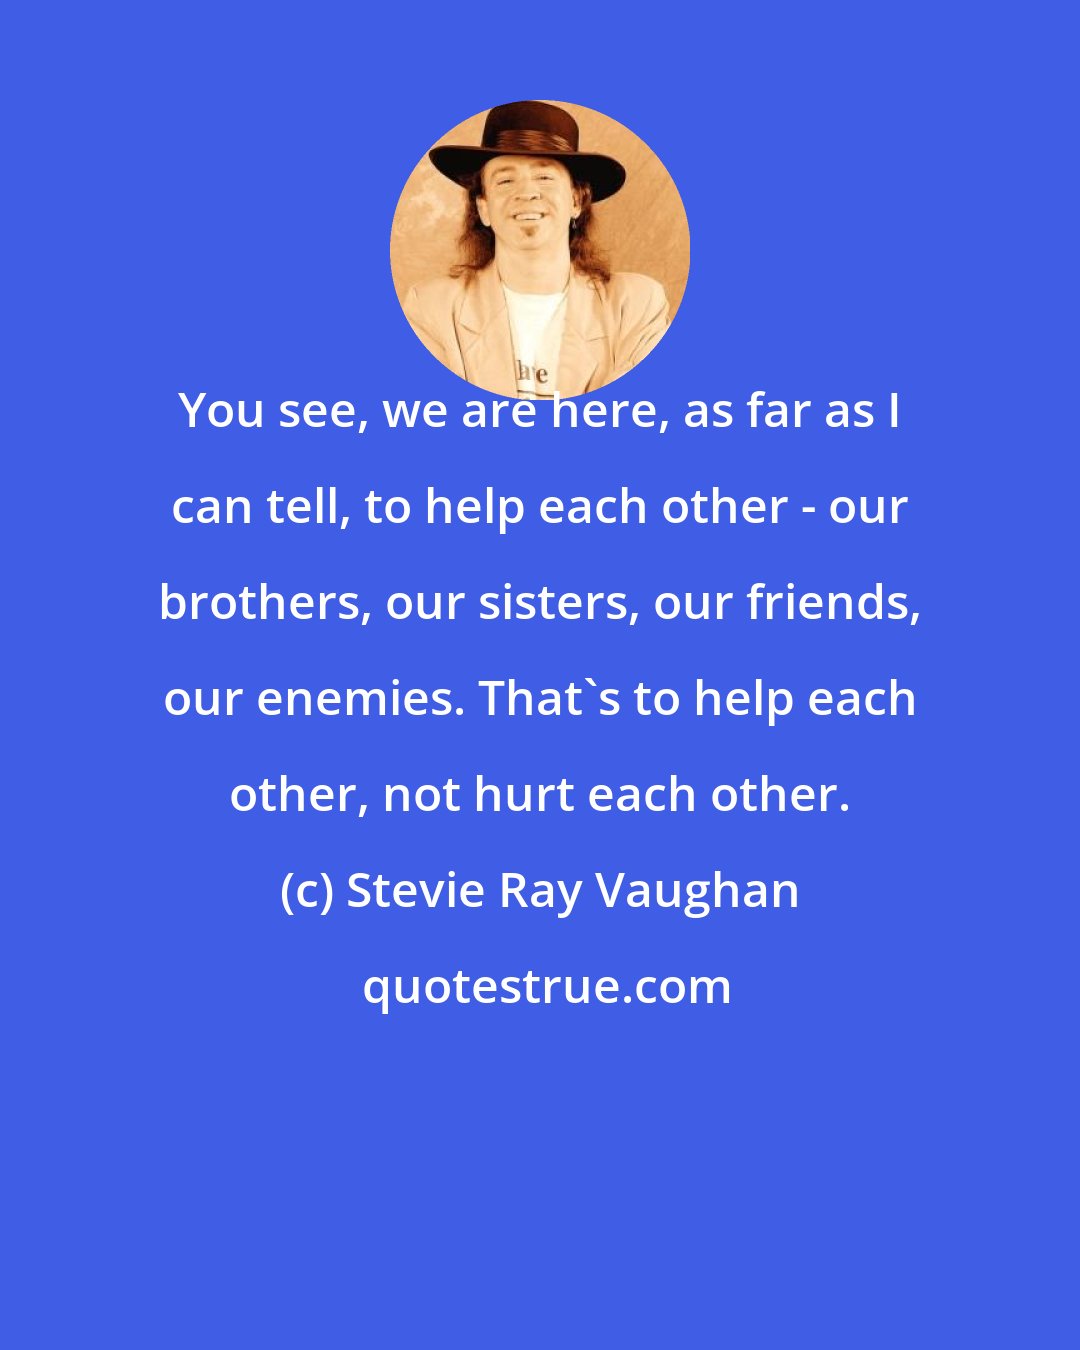 Stevie Ray Vaughan: You see, we are here, as far as I can tell, to help each other - our brothers, our sisters, our friends, our enemies. That's to help each other, not hurt each other.